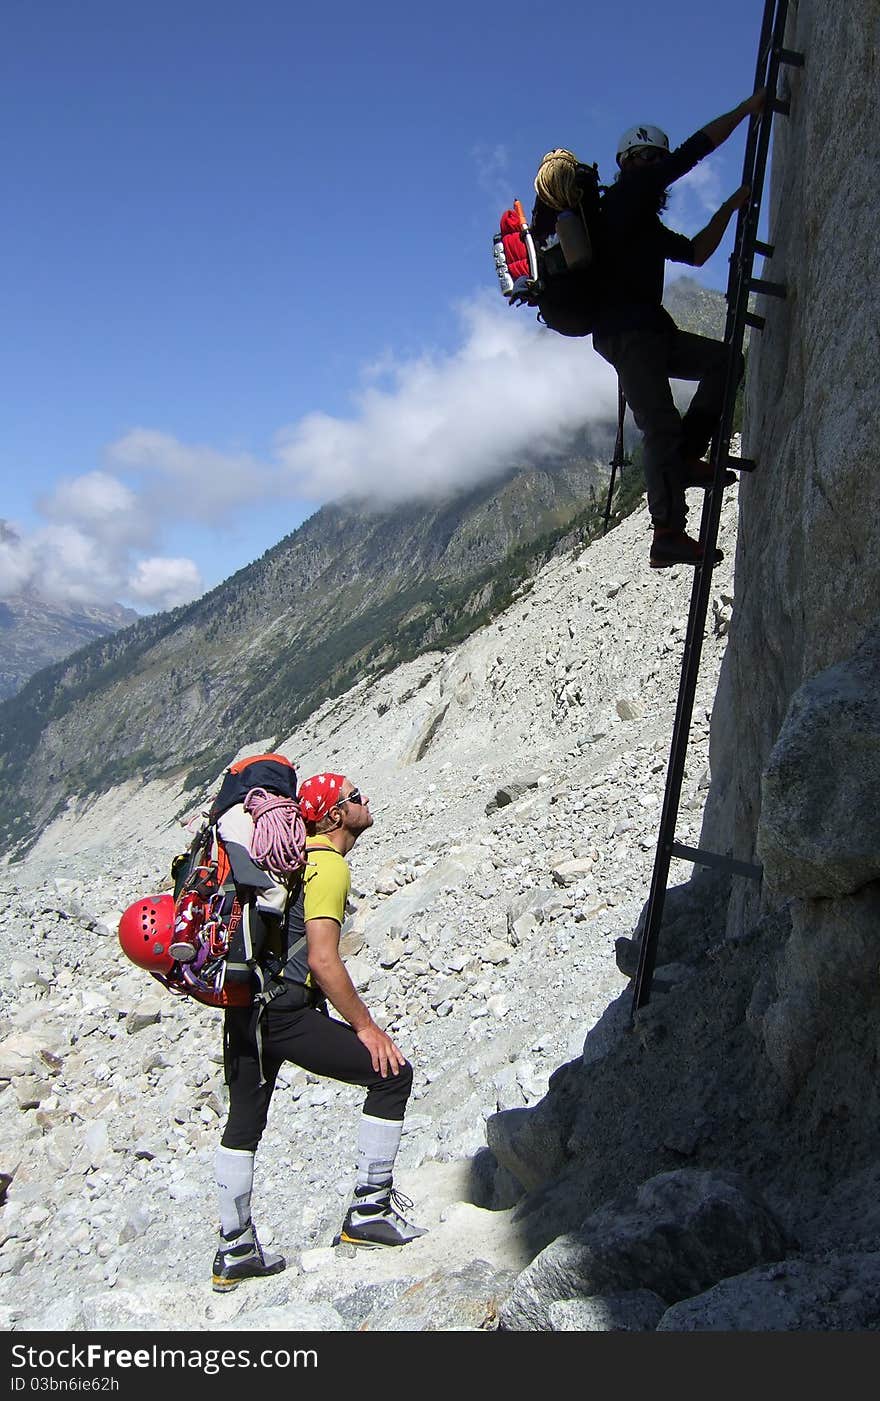 Climbers using a steel ladder to climb from the Mer De Glace morraine towards the Charpoua hut, in the Alps, near Chamonix, Mont Blanc region, France. Climbers using a steel ladder to climb from the Mer De Glace morraine towards the Charpoua hut, in the Alps, near Chamonix, Mont Blanc region, France